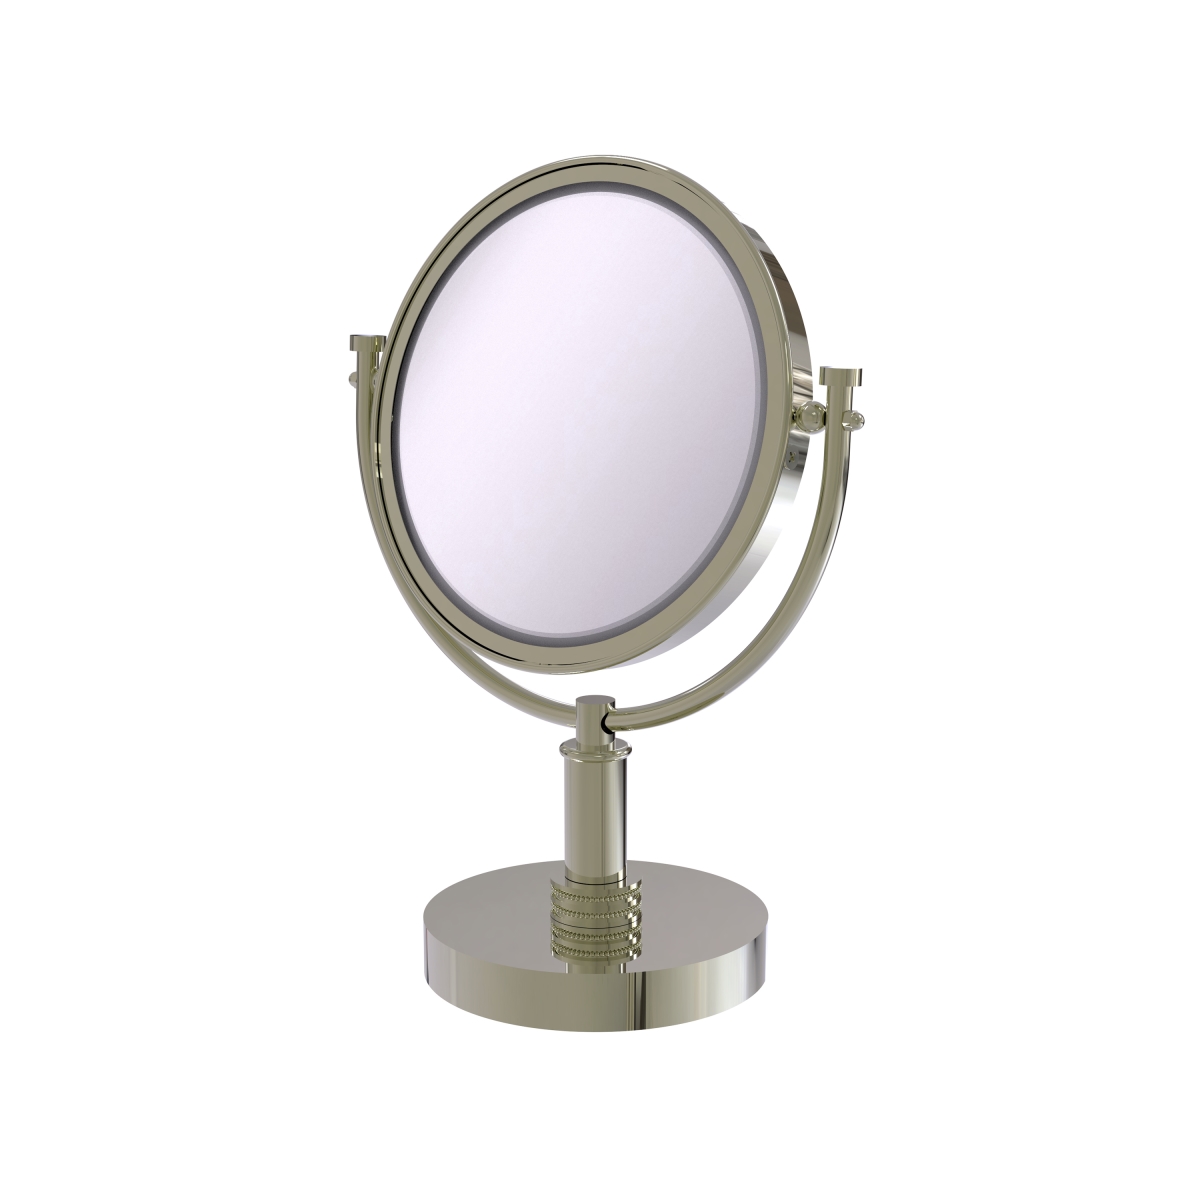 Picture of Allied Brass DM-4D-3X-PNI 8 in. Vanity Top Make-Up Mirror 3X Magnification, Polished Nickel - 15 x 8 x 8 in.